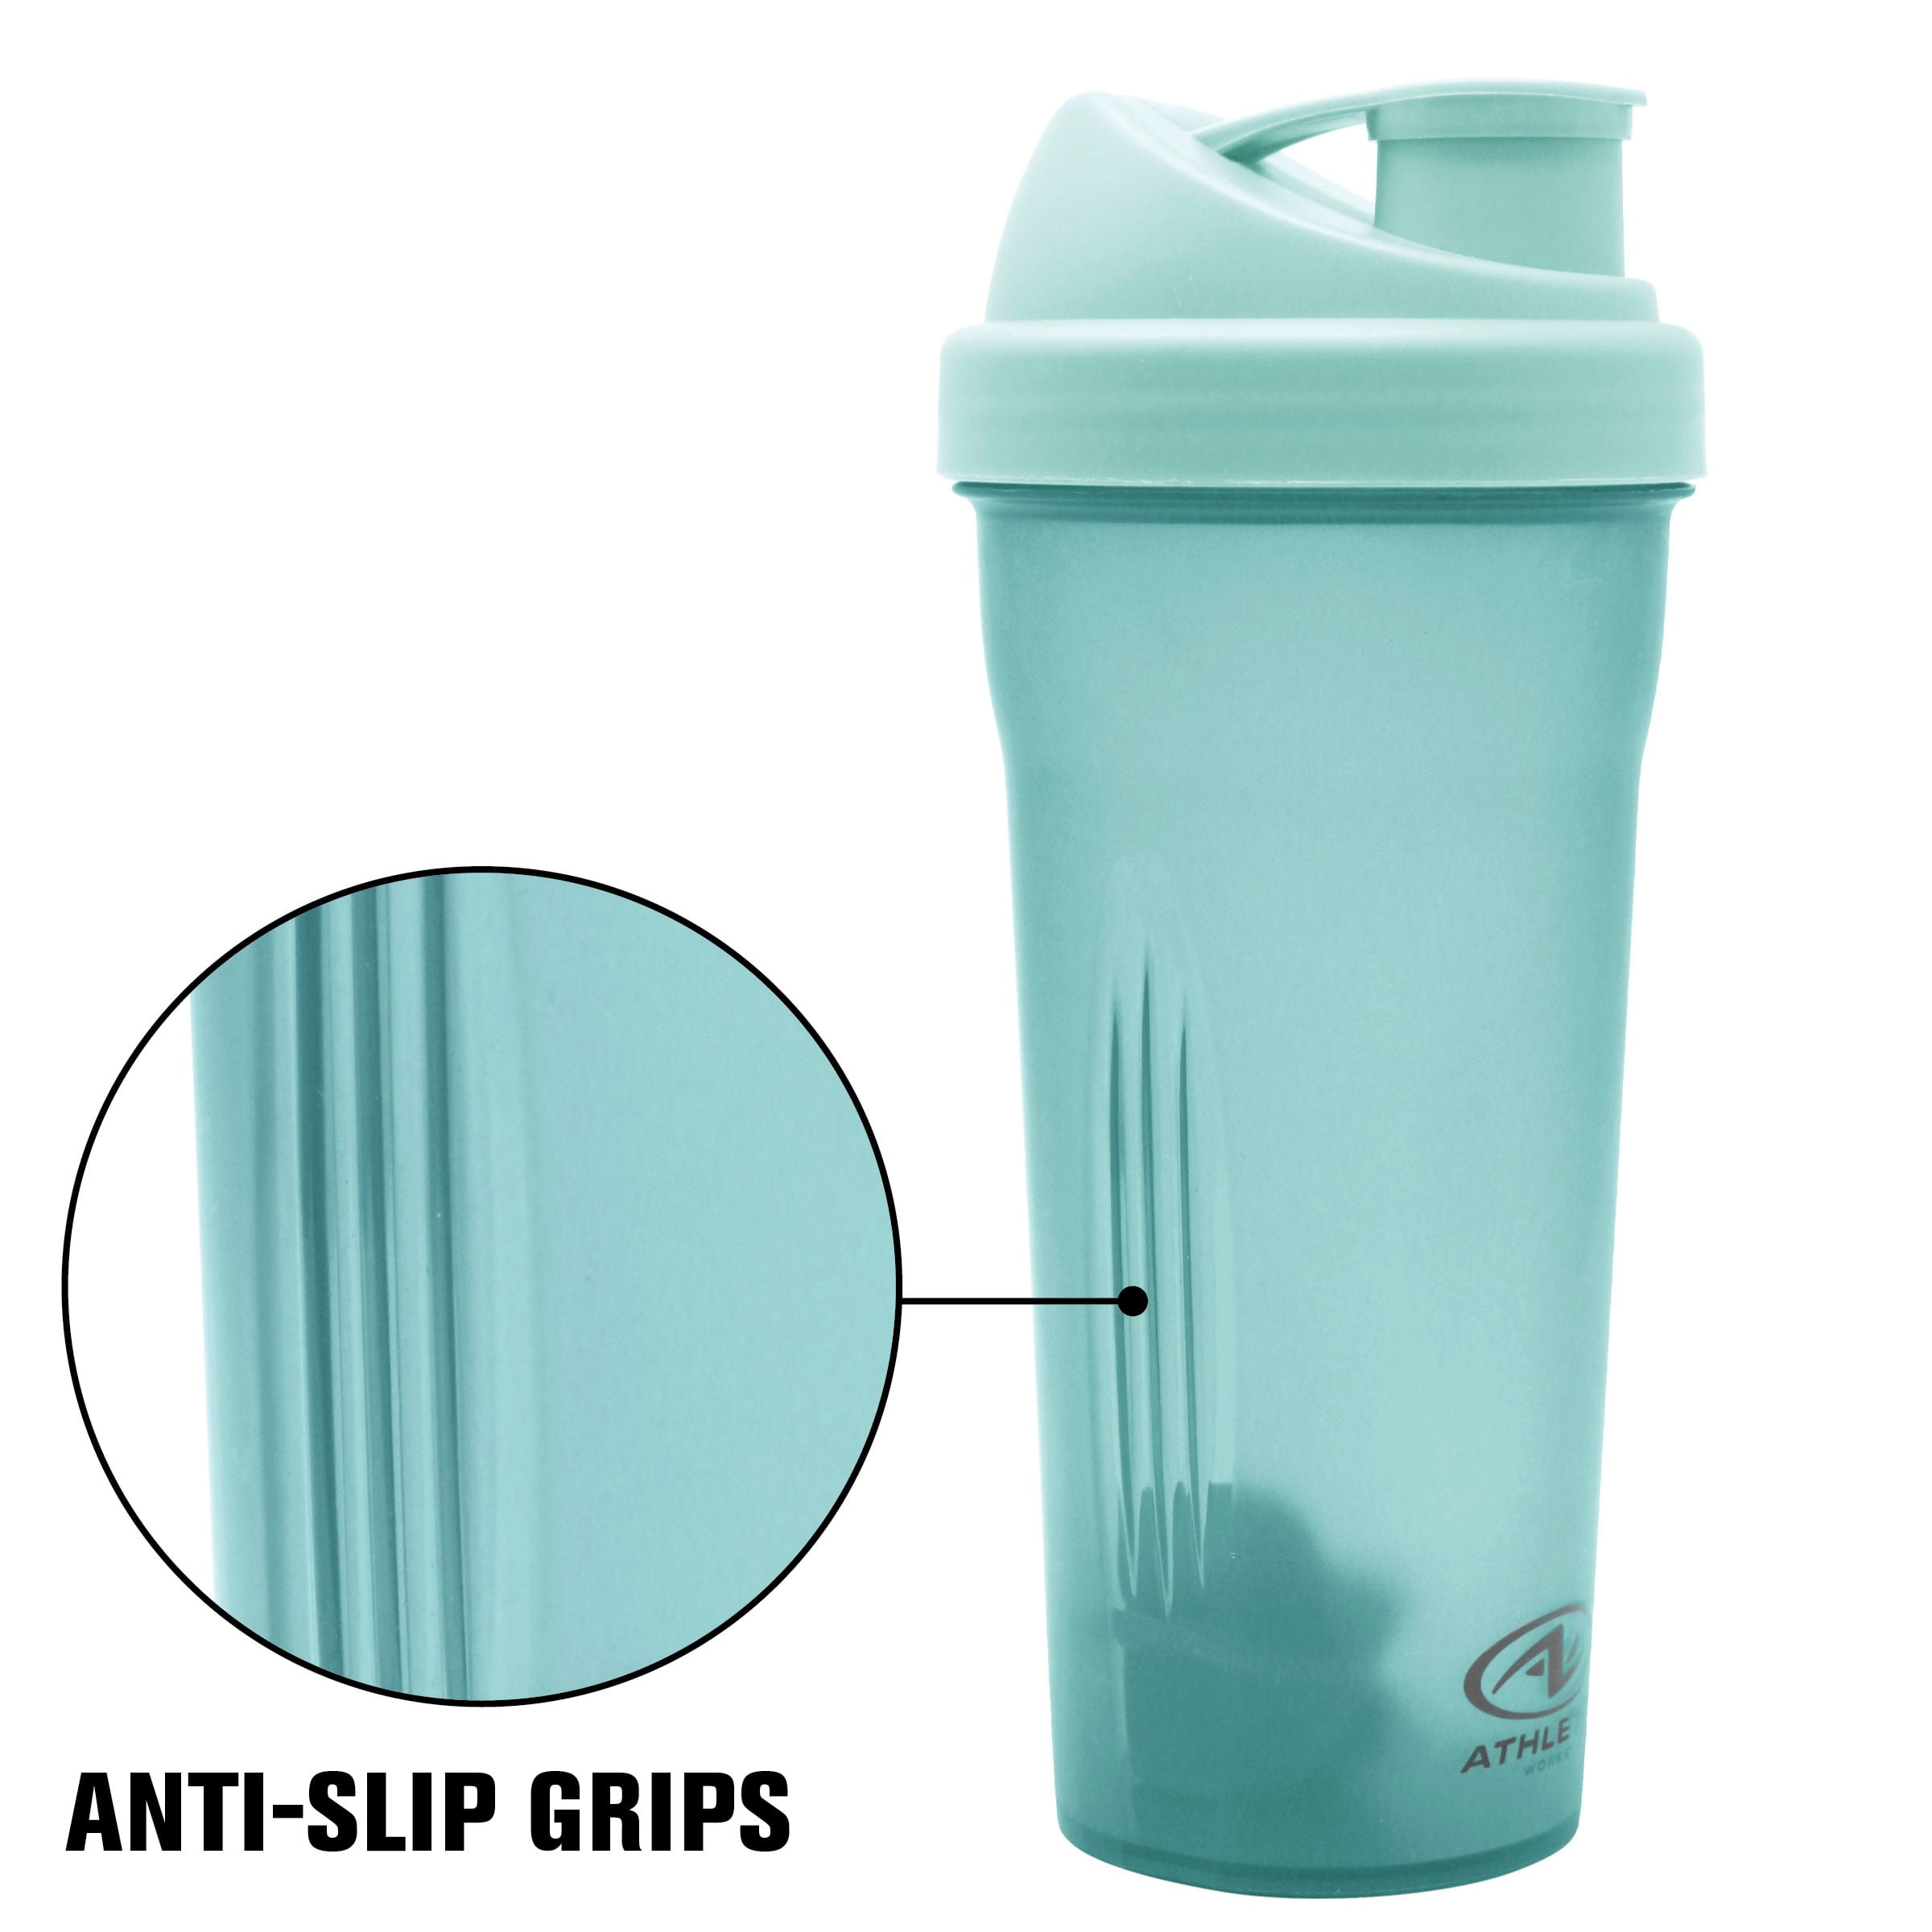 No Pain No Gain Sports Gym Fitness Shaker Bottle Perfect for Protein Shakes and Pre Workout with Plastic Whisk Mixer Ball for Smooth Mix